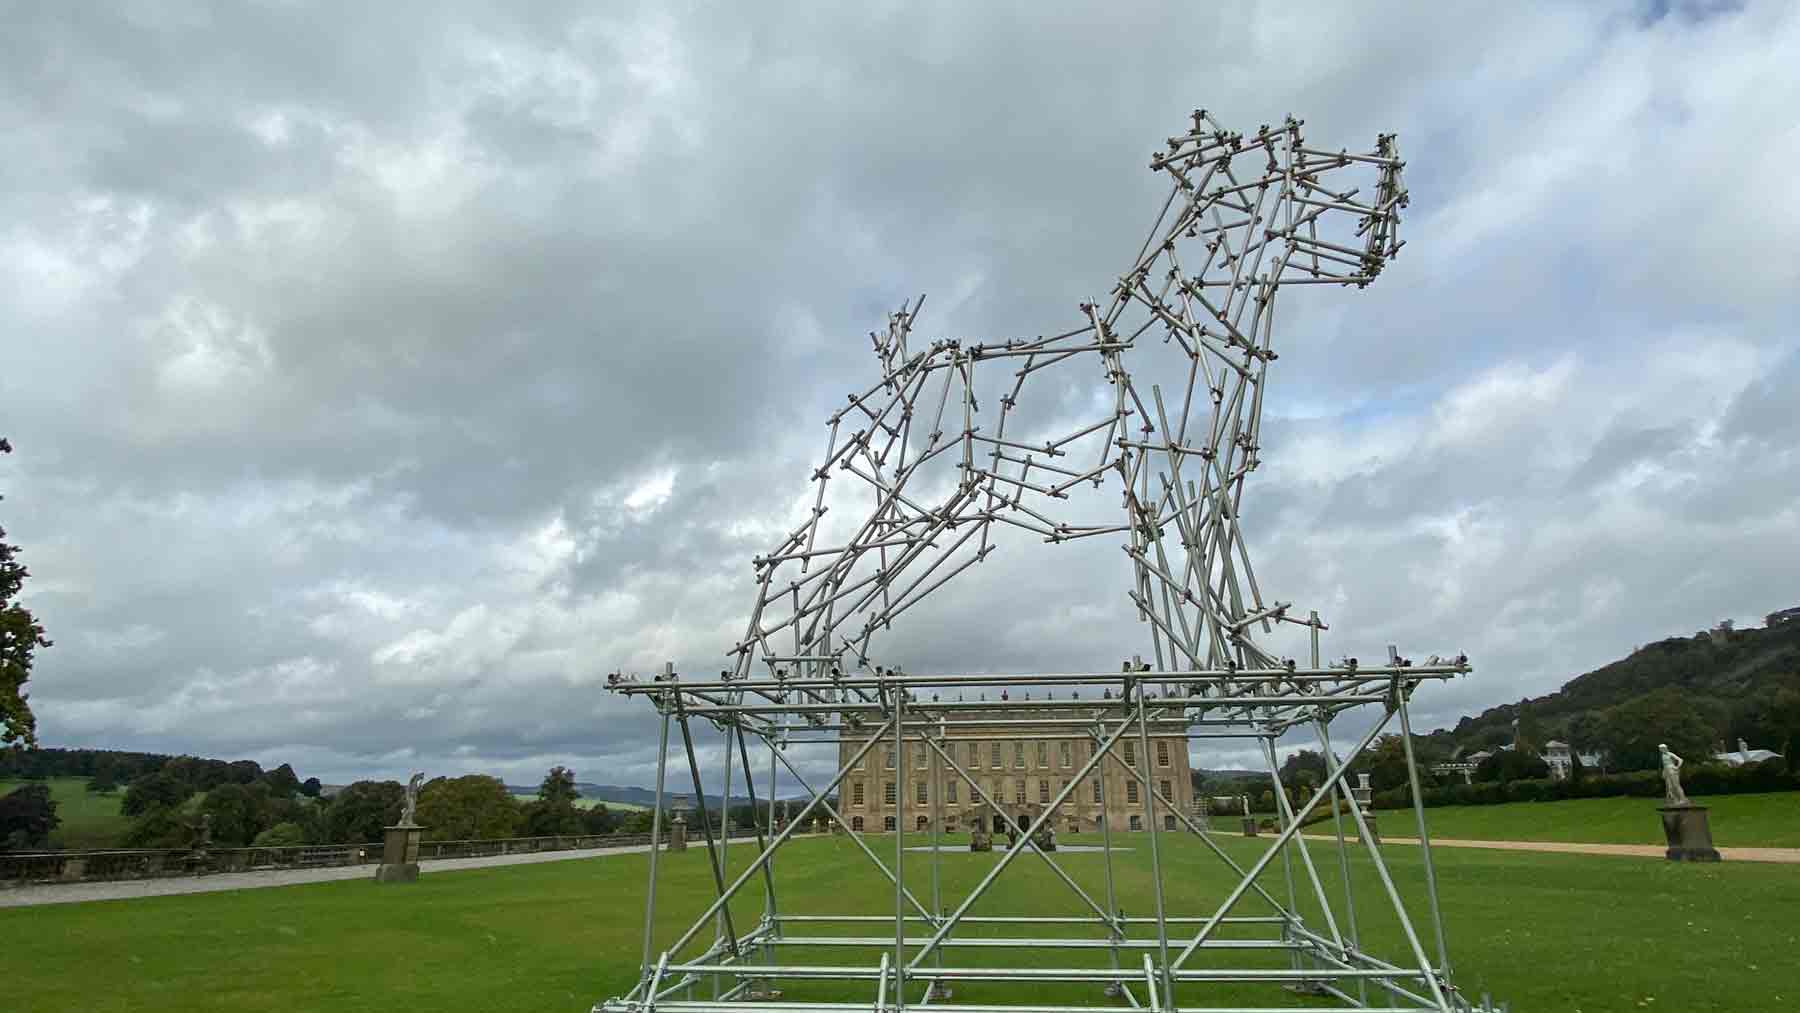 Chatsworth seen through a large dog sculpture made from scaffolding